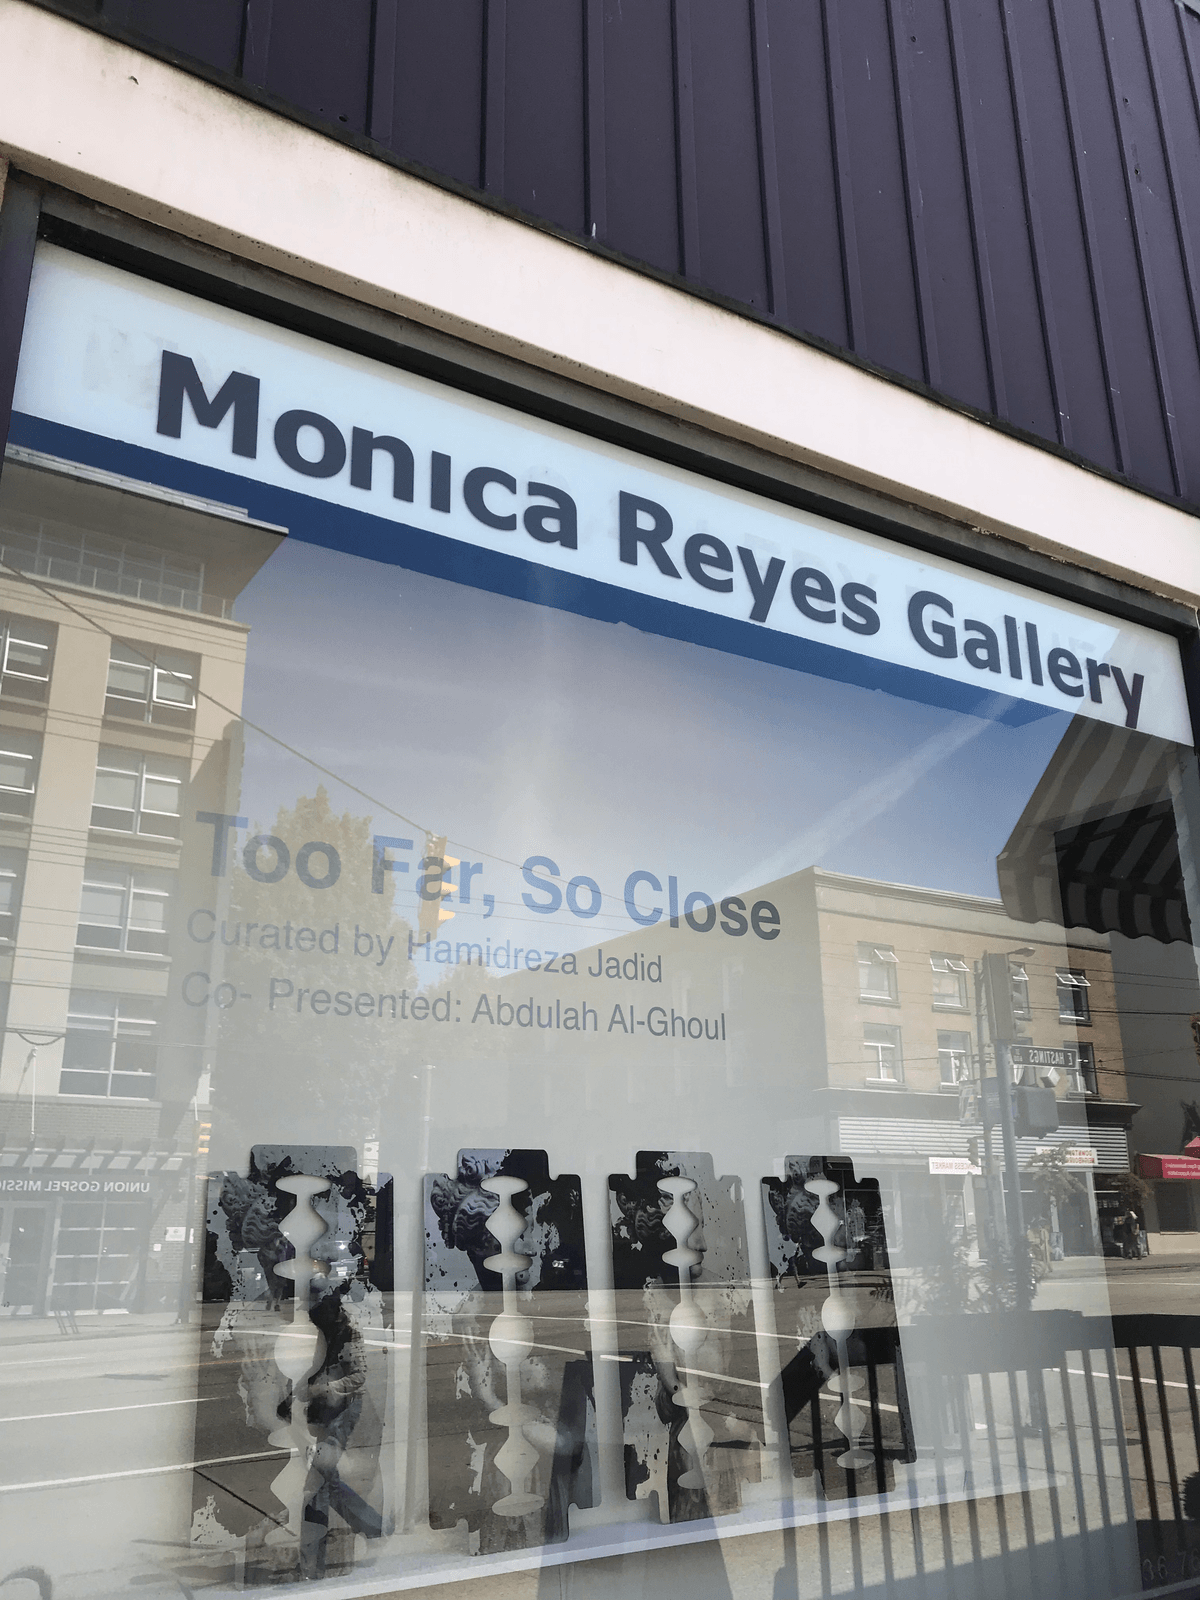 Announcing "Too Far, So Close": our Début Live Exhibition at Monica Reyes Gallery in Vancouver, BC